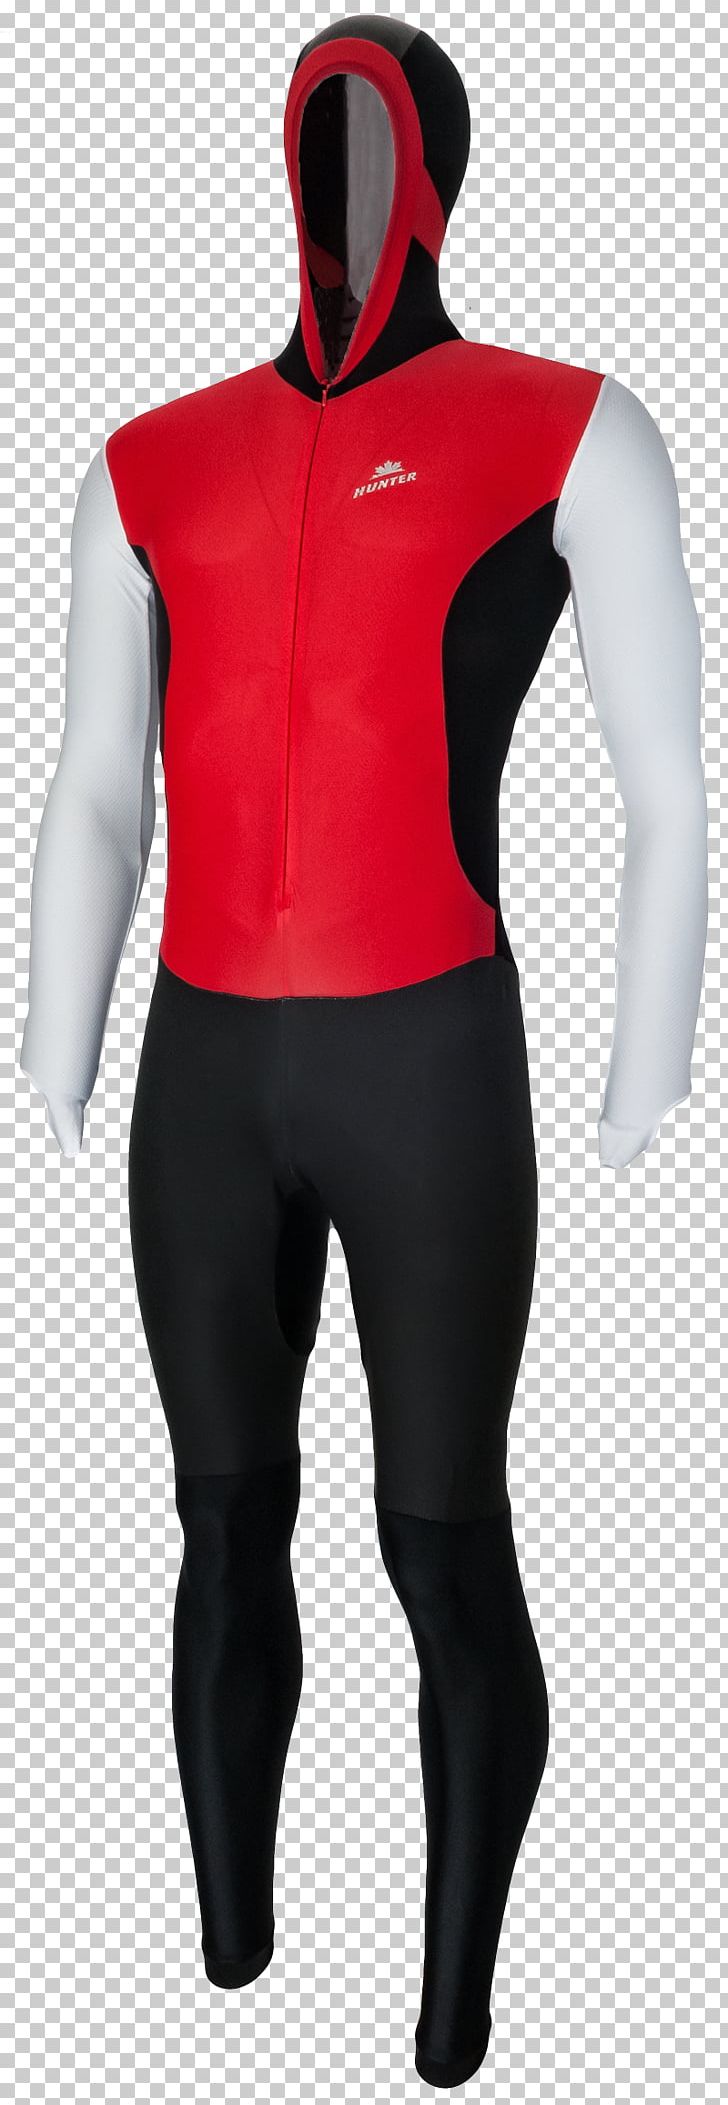 Wetsuit Spandex PNG, Clipart, Costume, Hood, Personal Protective Equipment, Red, Sleeve Free PNG Download